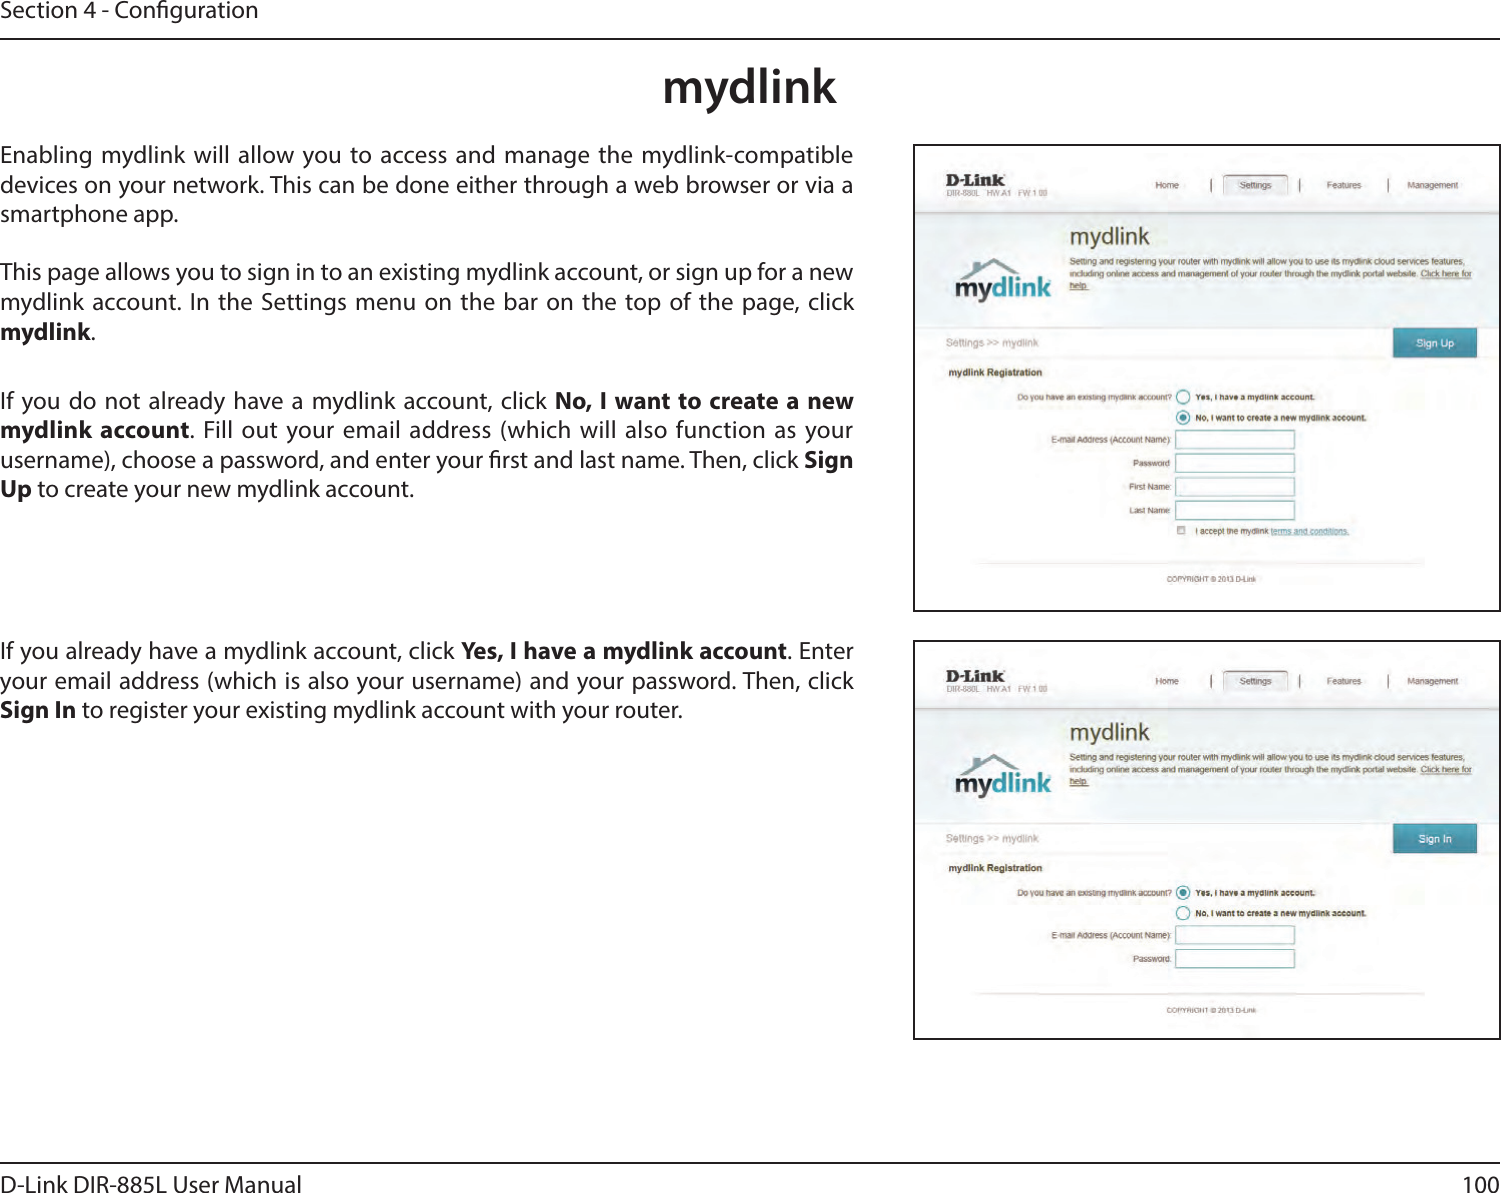 100D-Link DIR-885L User ManualSection 4 - CongurationmydlinkEnabling mydlink will allow you to access and manage the mydlink-compatible devices on your network. This can be done either through a web browser or via a smartphone app.This page allows you to sign in to an existing mydlink account, or sign up for a new mydlink account. In the Settings menu on the bar on the top of the page, click mydlink.If you do not already have a mydlink account, click No, I want to create a new mydlink account. Fill out your email address (which will also function as your username), choose a password, and enter your rst and last name. Then, click Sign Up to create your new mydlink account.If you already have a mydlink account, click Yes, I have a mydlink account. Enter your email address (which is also your username) and your password. Then, click Sign In to register your existing mydlink account with your router.